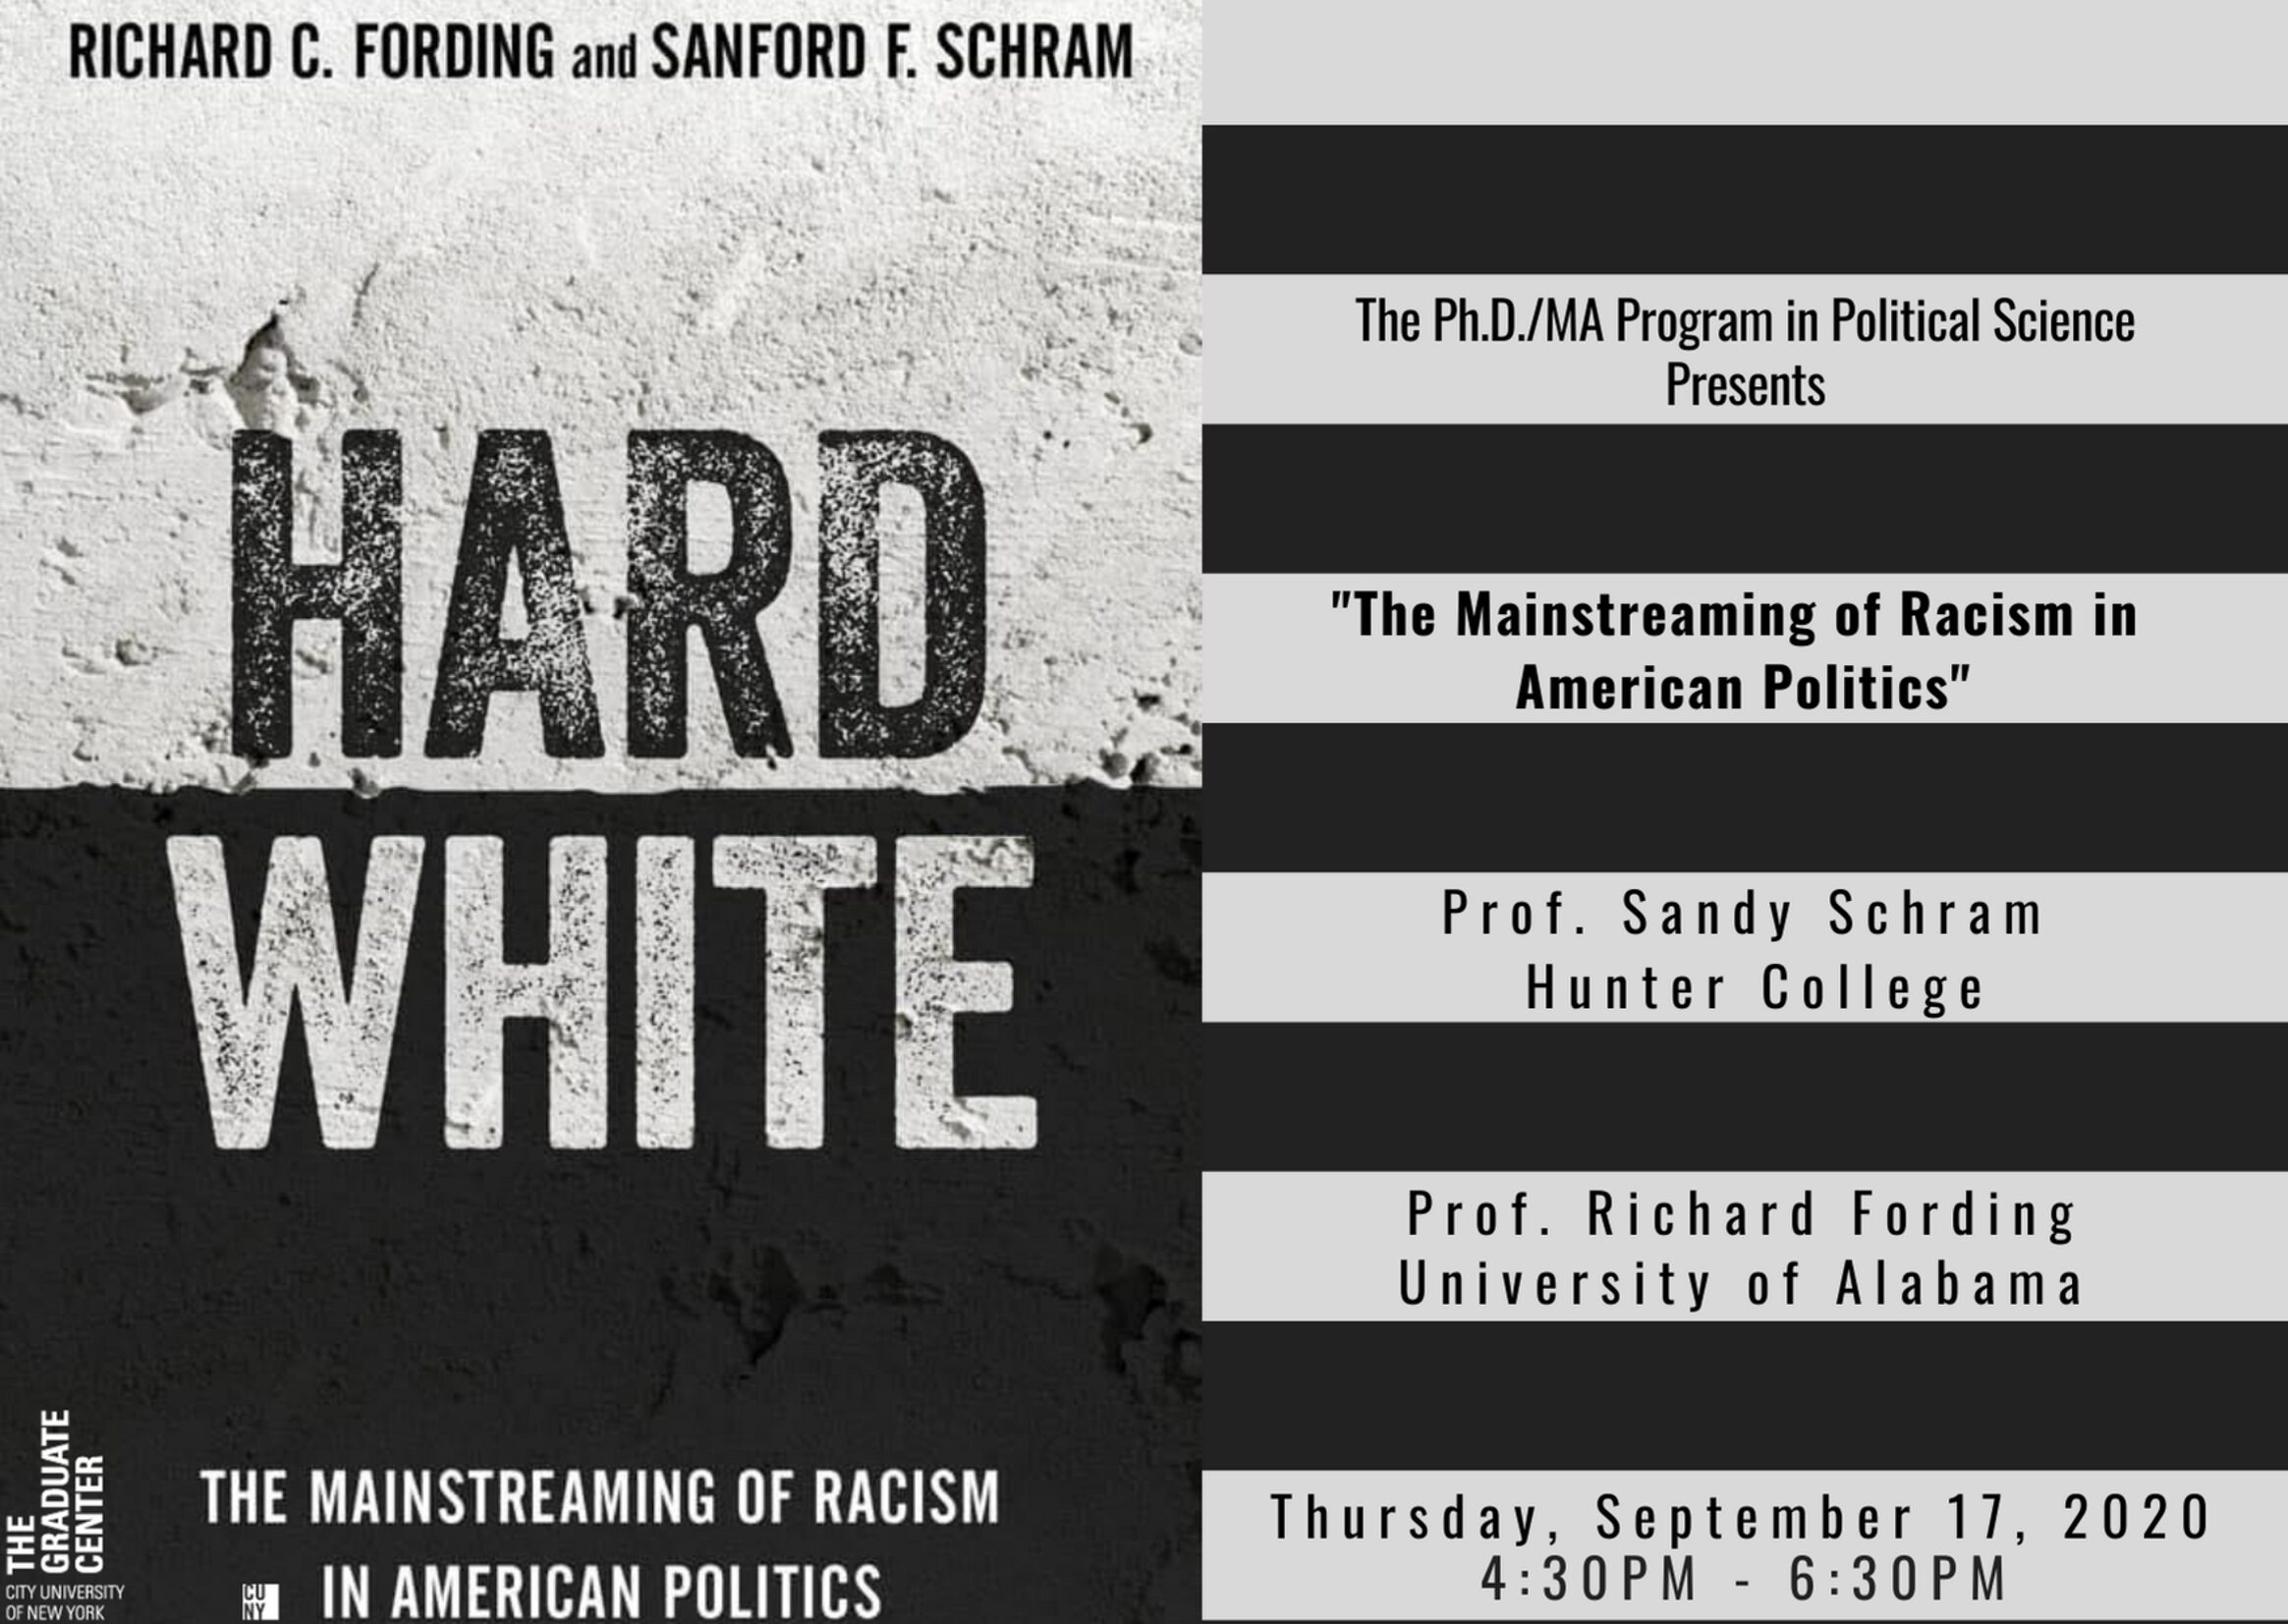 Election Series: Sanford Schram and Richard Fording, "The Mainstreaming of Racism in American Politics" Thursday September 17, 4:30pm